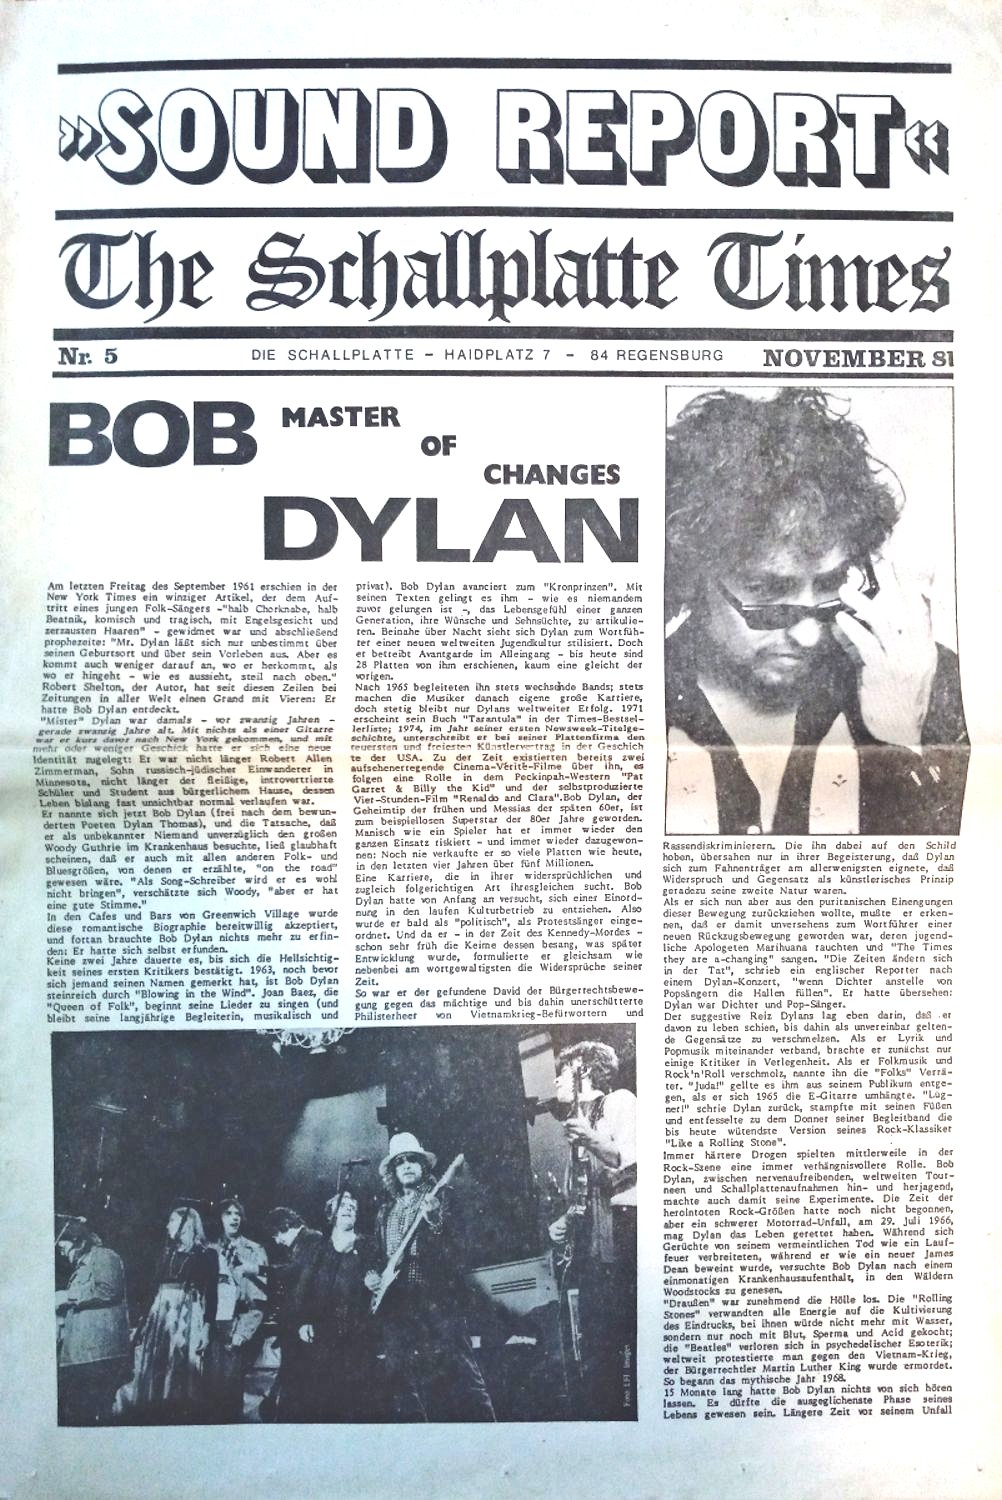 THE SCHALLPLATTE TIMES Bob Dylan cover story